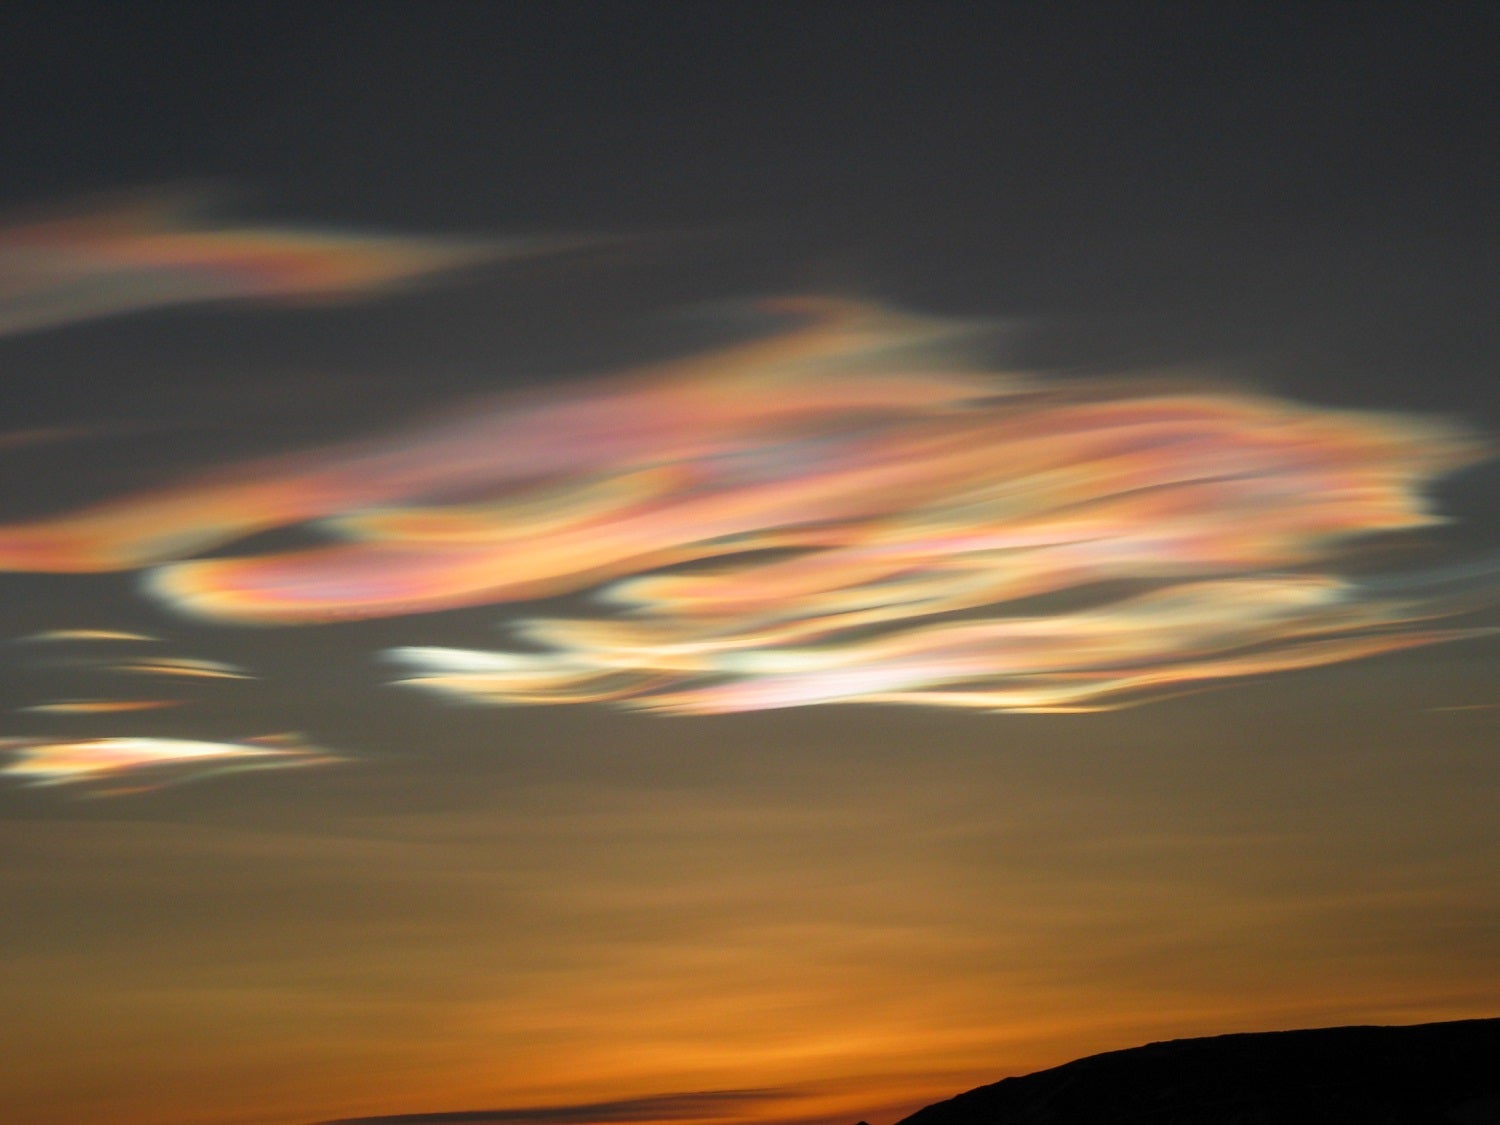 Nacreous types of clouds